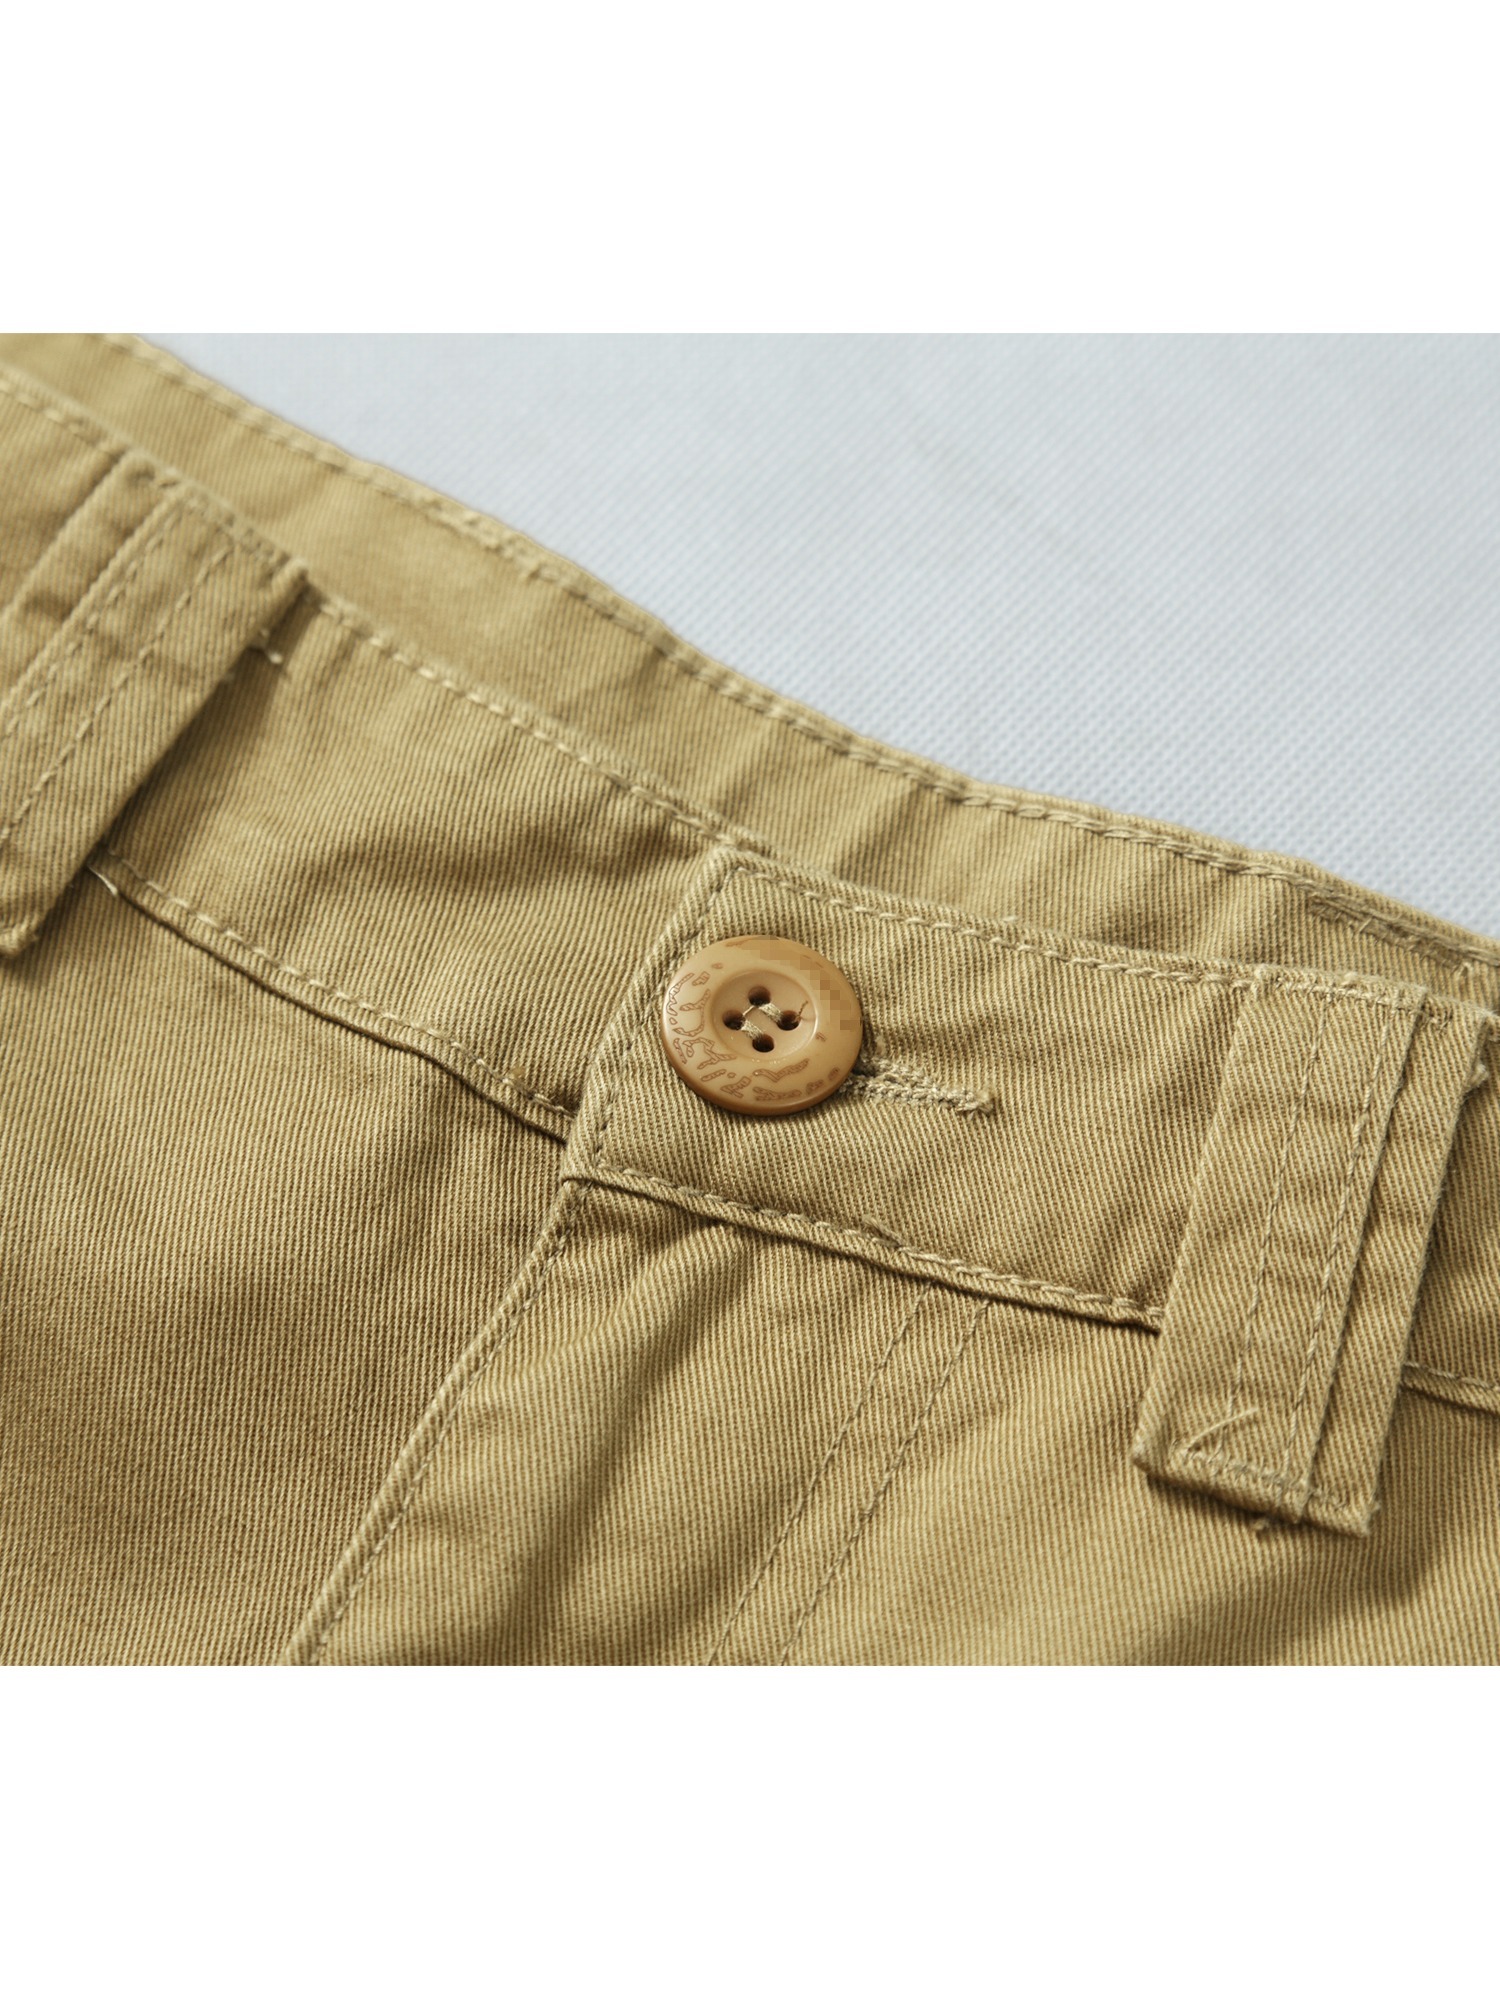 Mens Military Cargo Mens Beige Cargo Trousers With Multi Pockets Casual  Cotton Overalls For Work And Outdoor Activities From Dou02, $29.83